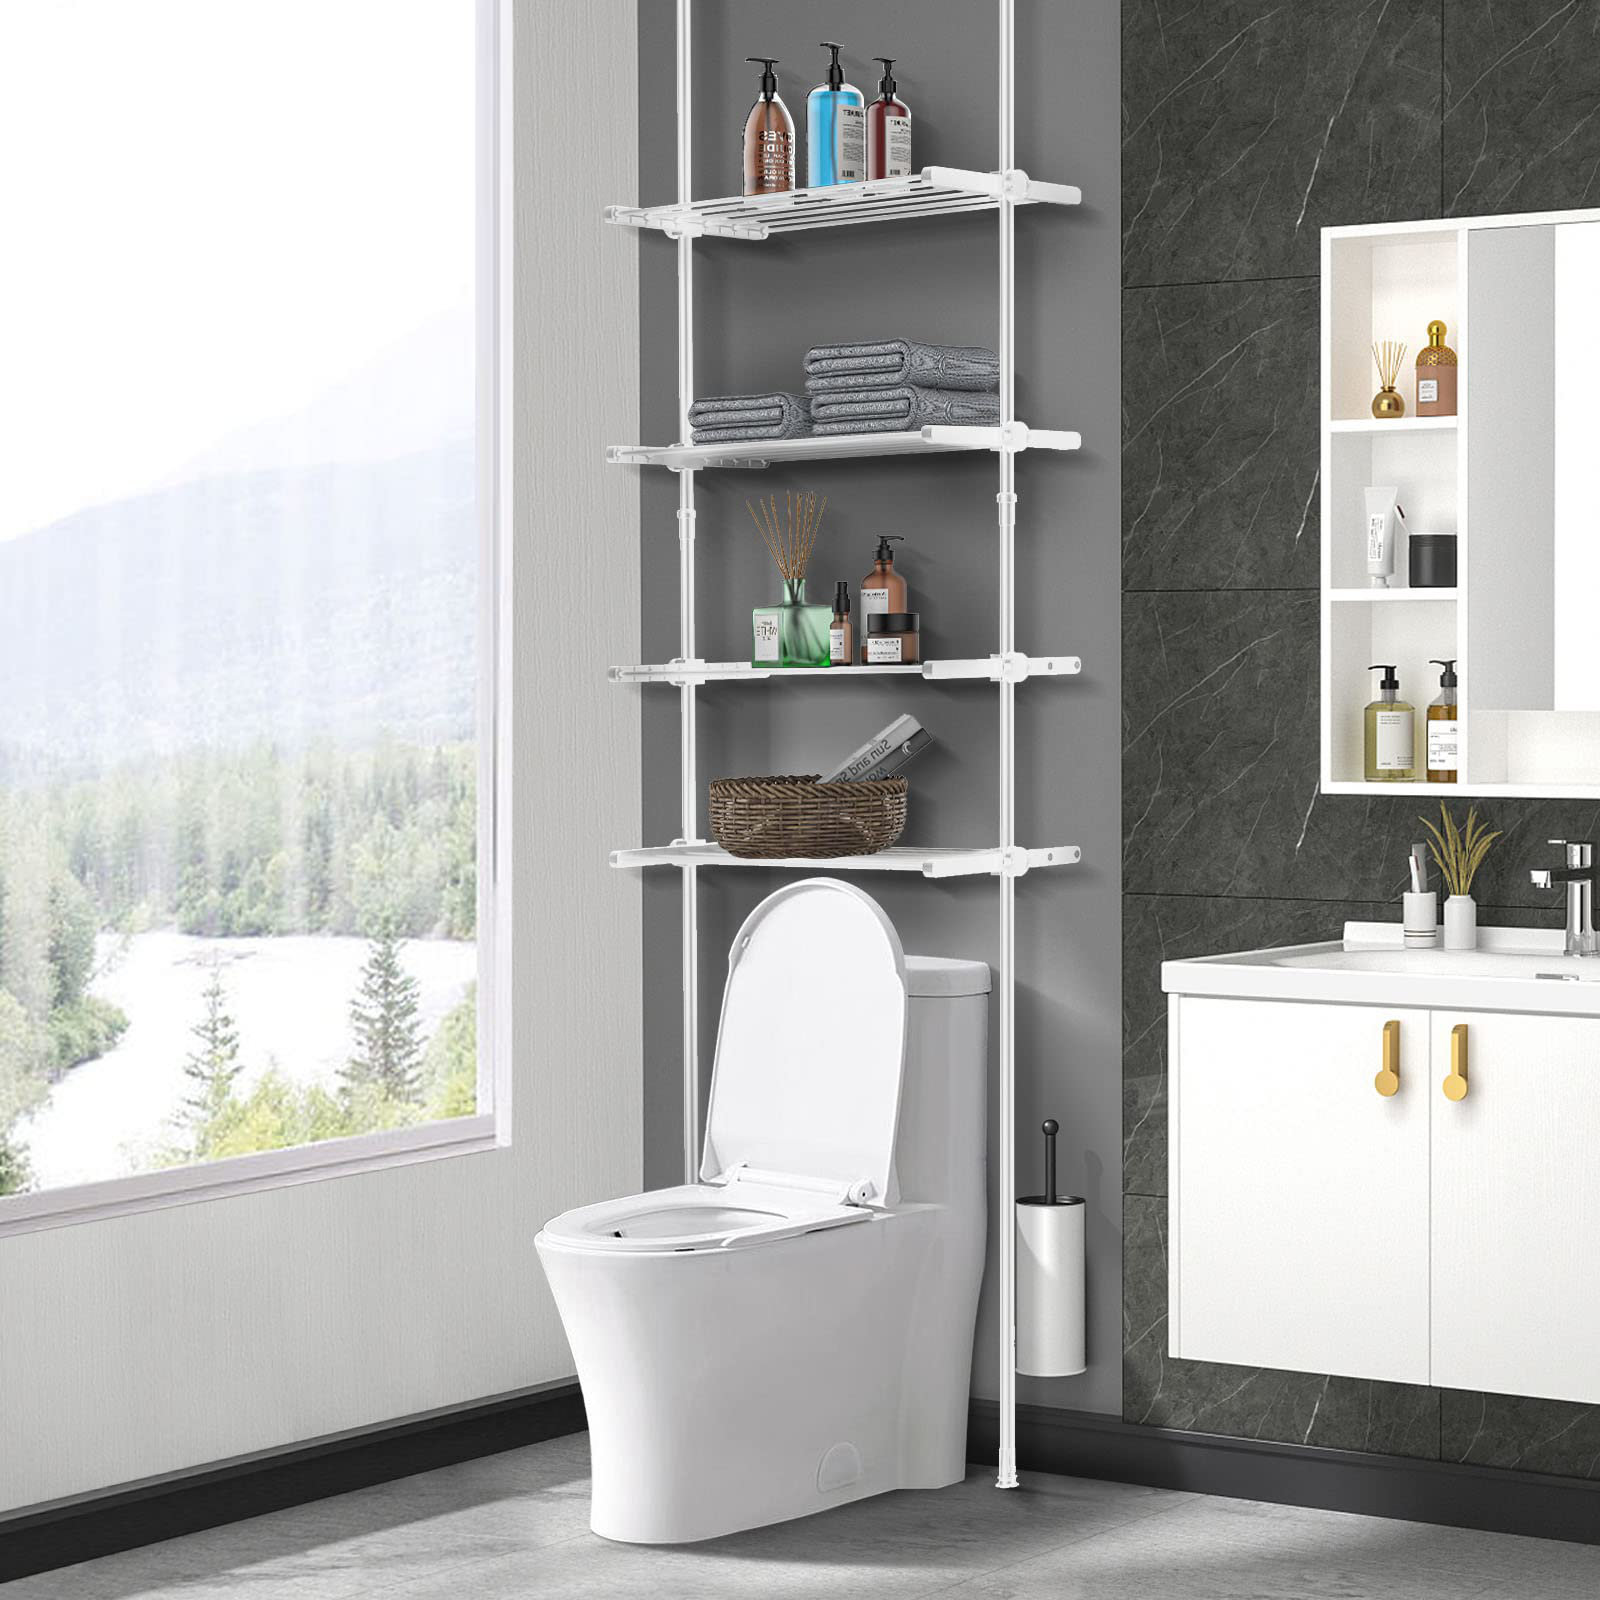 Bathroom Racks and Shelves Over-The-Toilet Cabinet, 4 Tier Metal Shelving  Unit Adjustable with Tension Poles Industrial Storage Organizer, White 